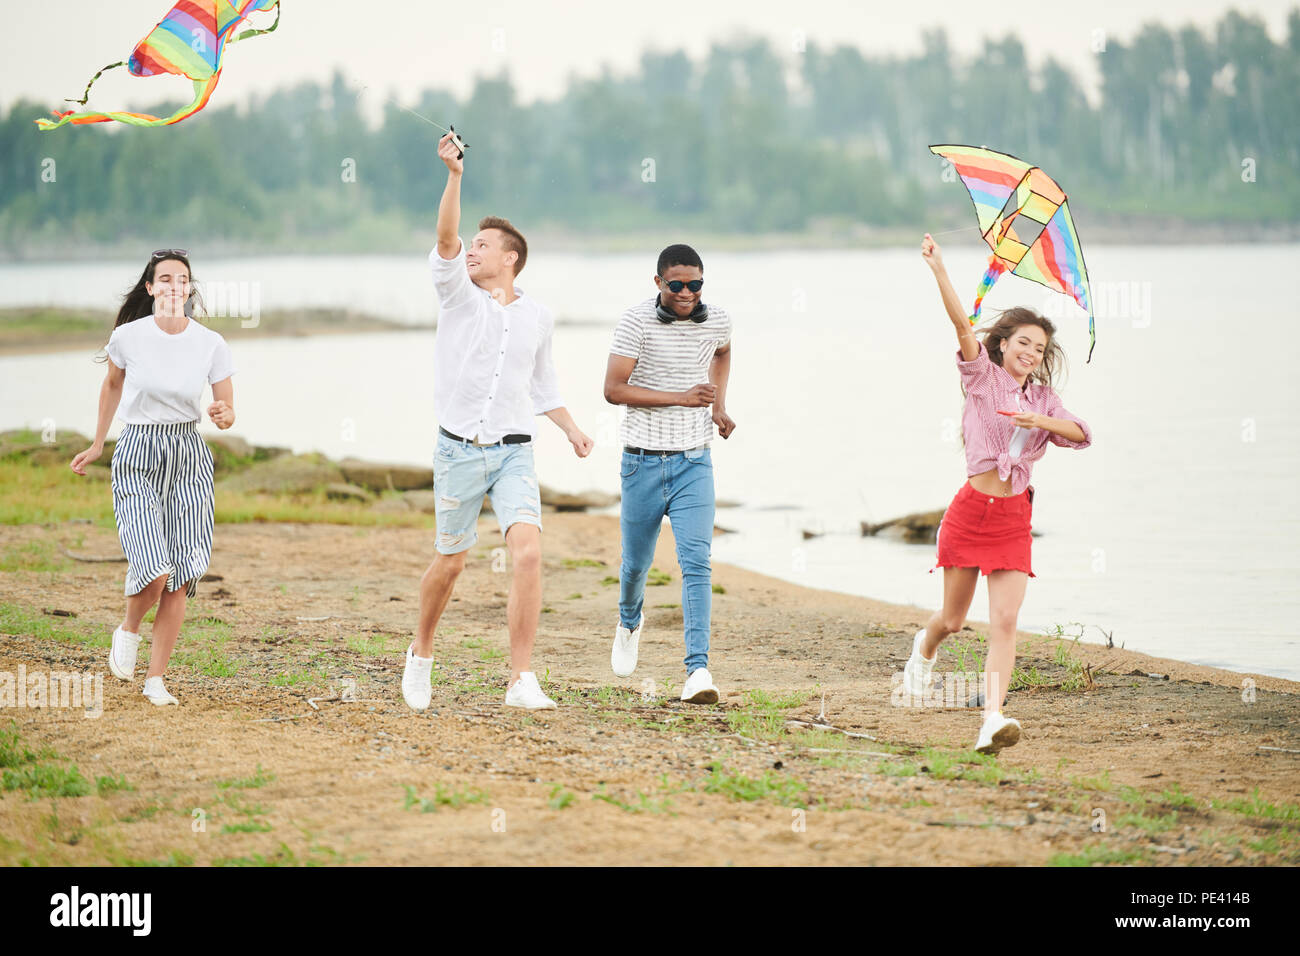 People playing with kites Stock Photo